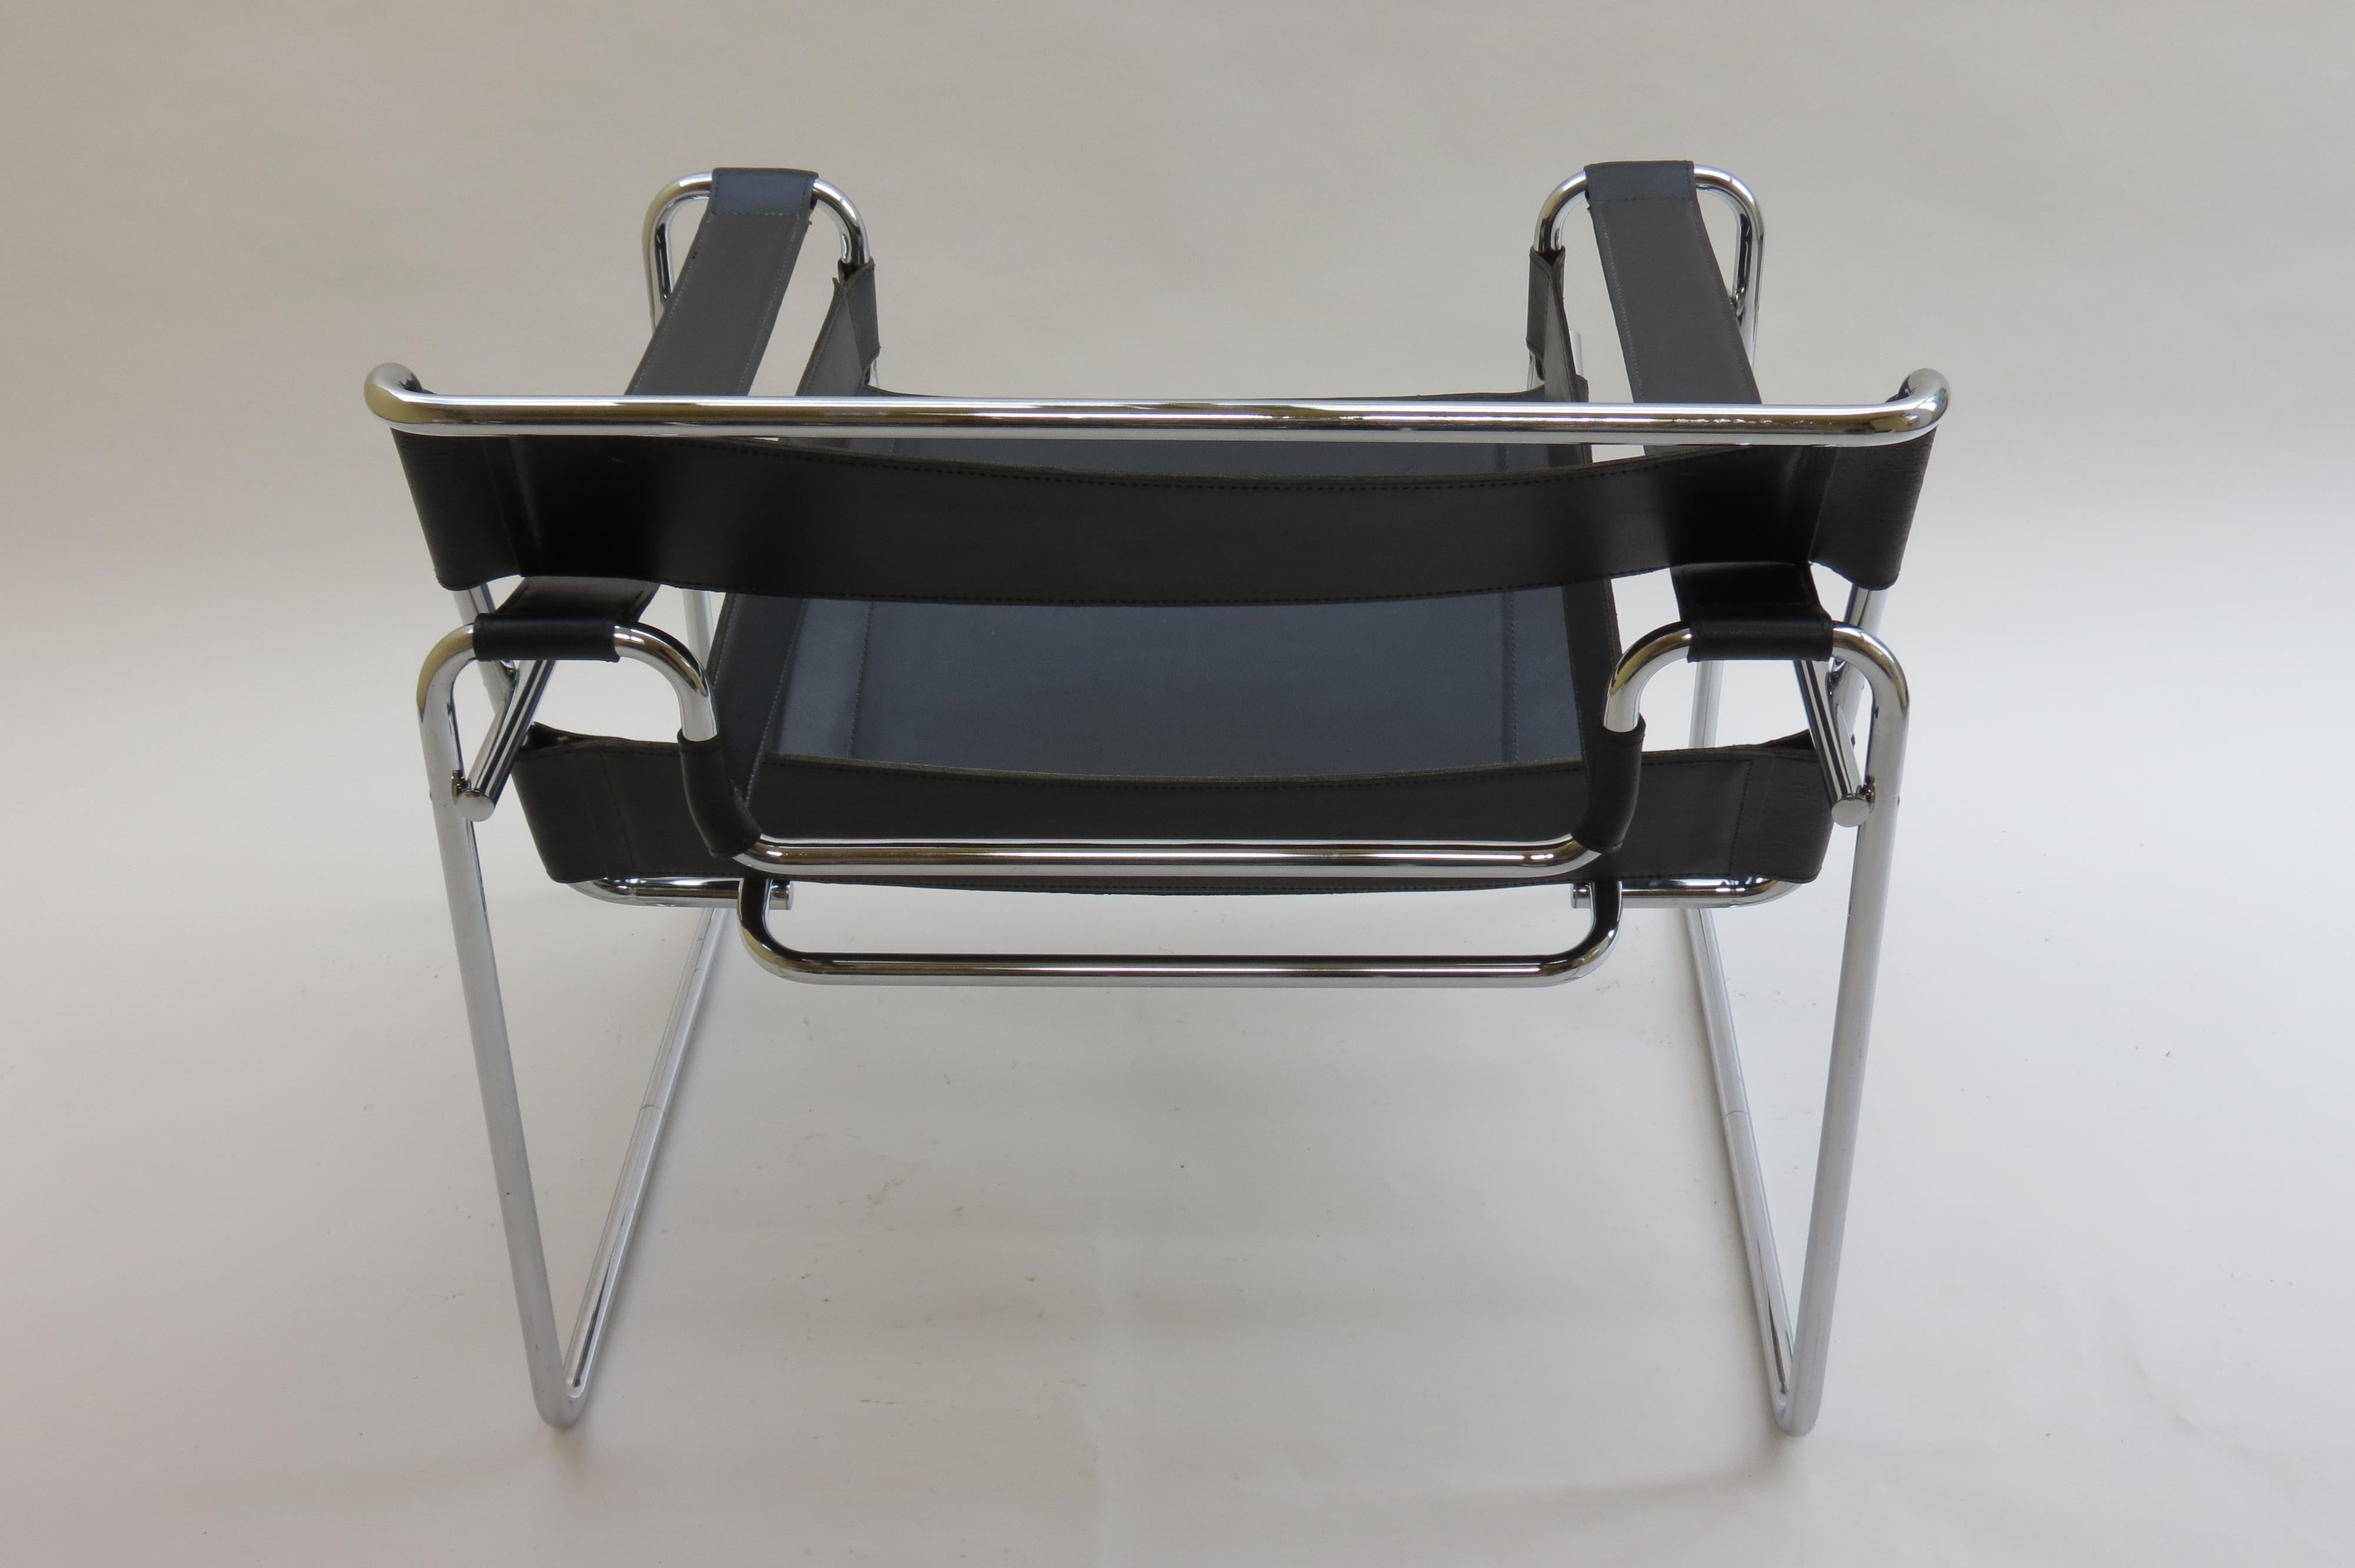 1980s Vintage Wassily B3 Black Leather and Chrome Chair Marcel Breuer 2 Avail B 2